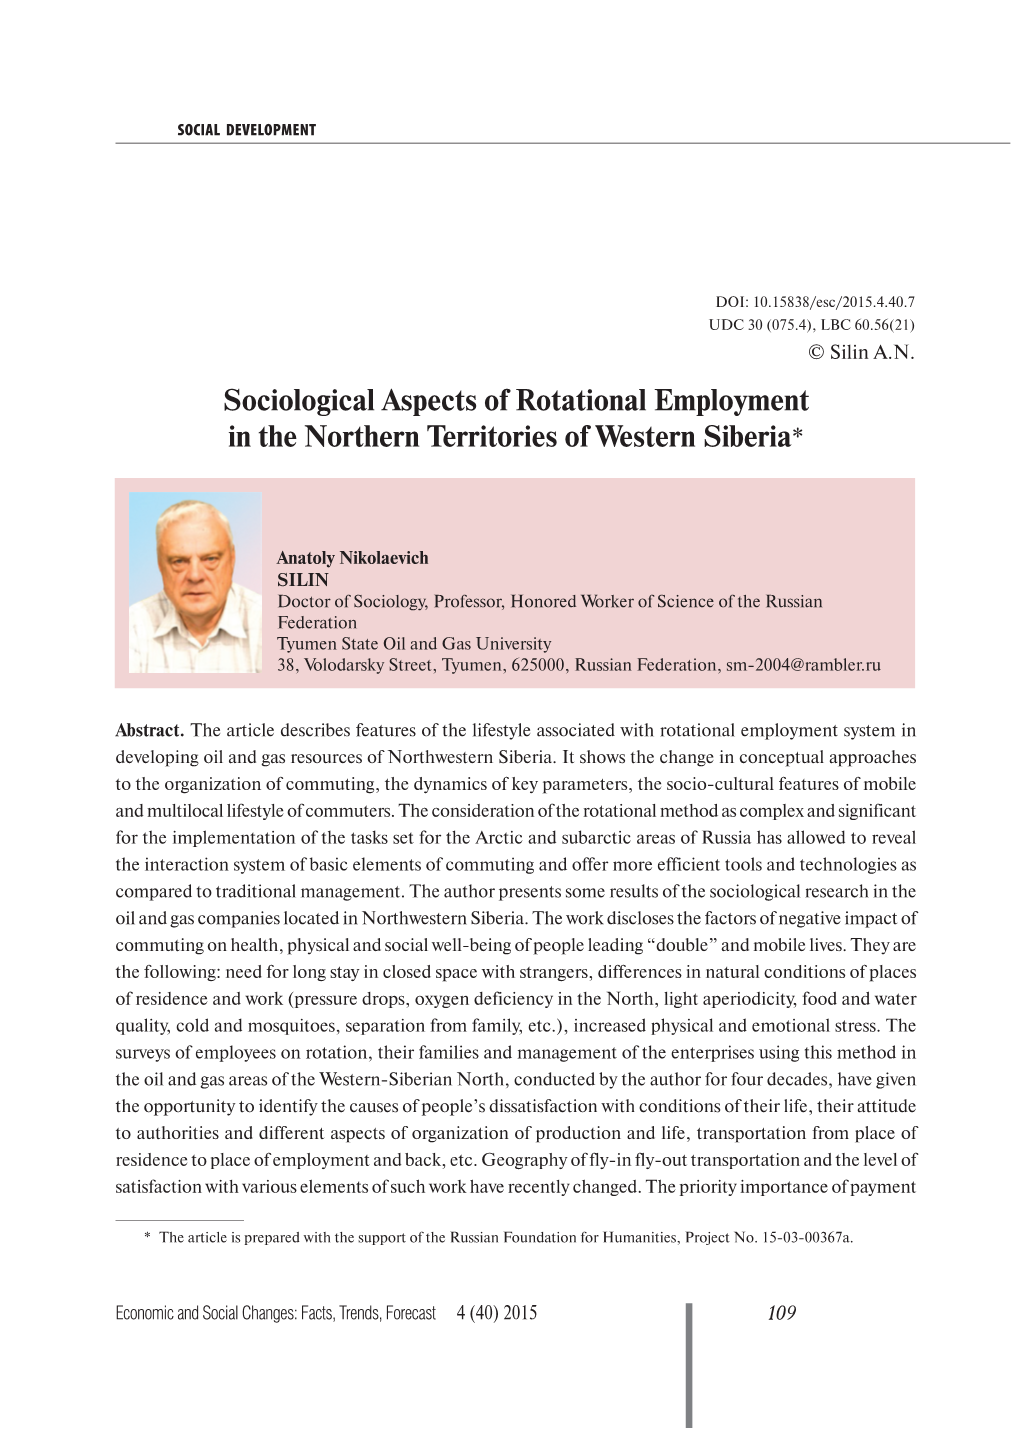 Sociological Aspects of Rotational Employment in the Northern Territories of Western Siberia*